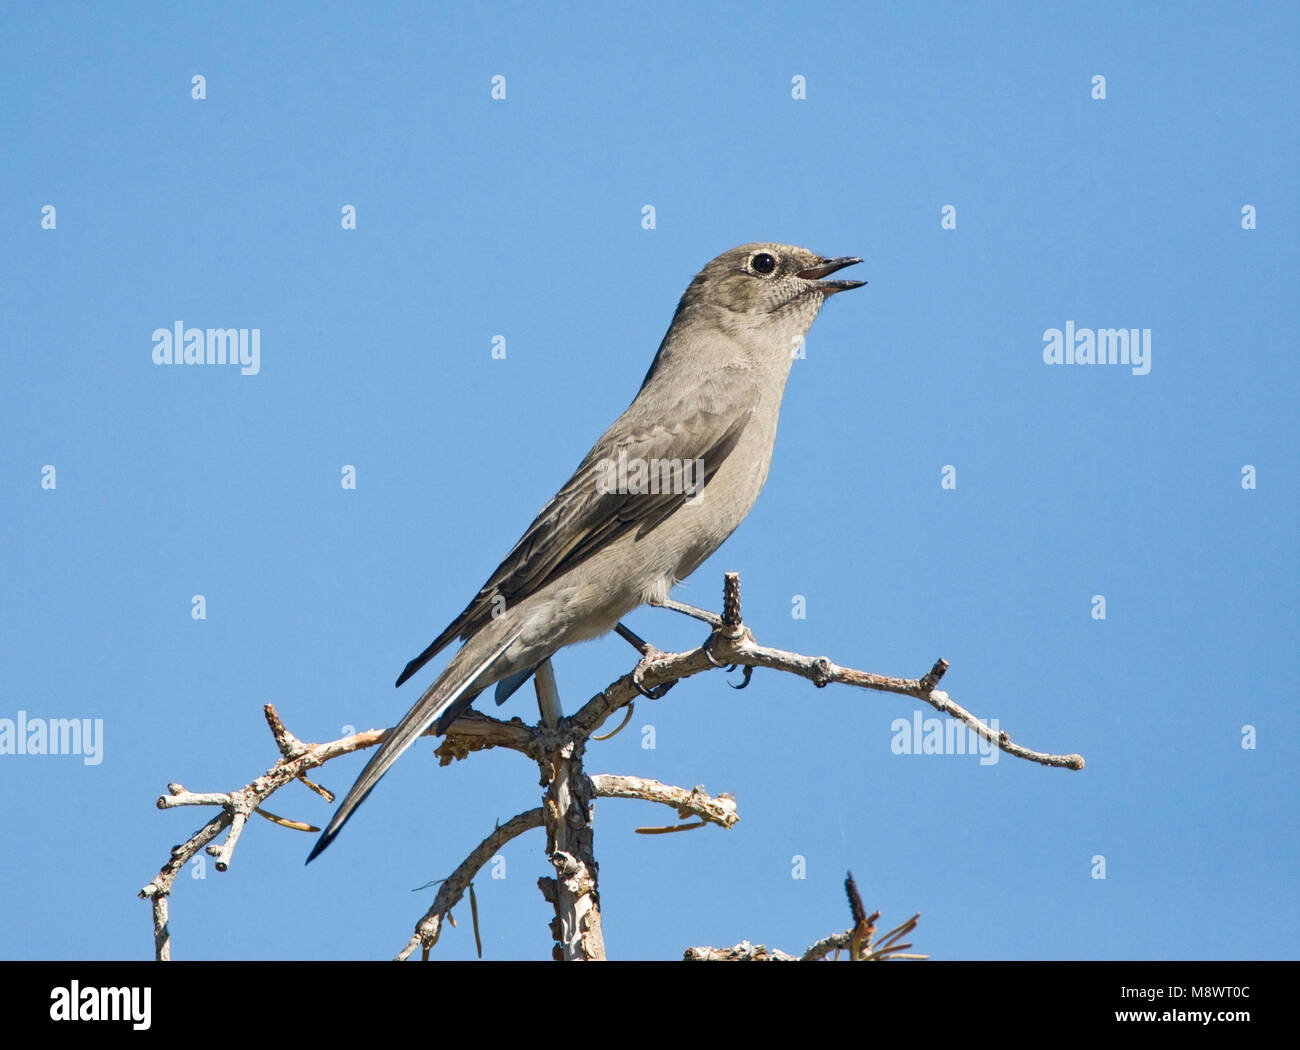 Townsend-solitaire zingend, Townsends solitaire singng Stock Photo